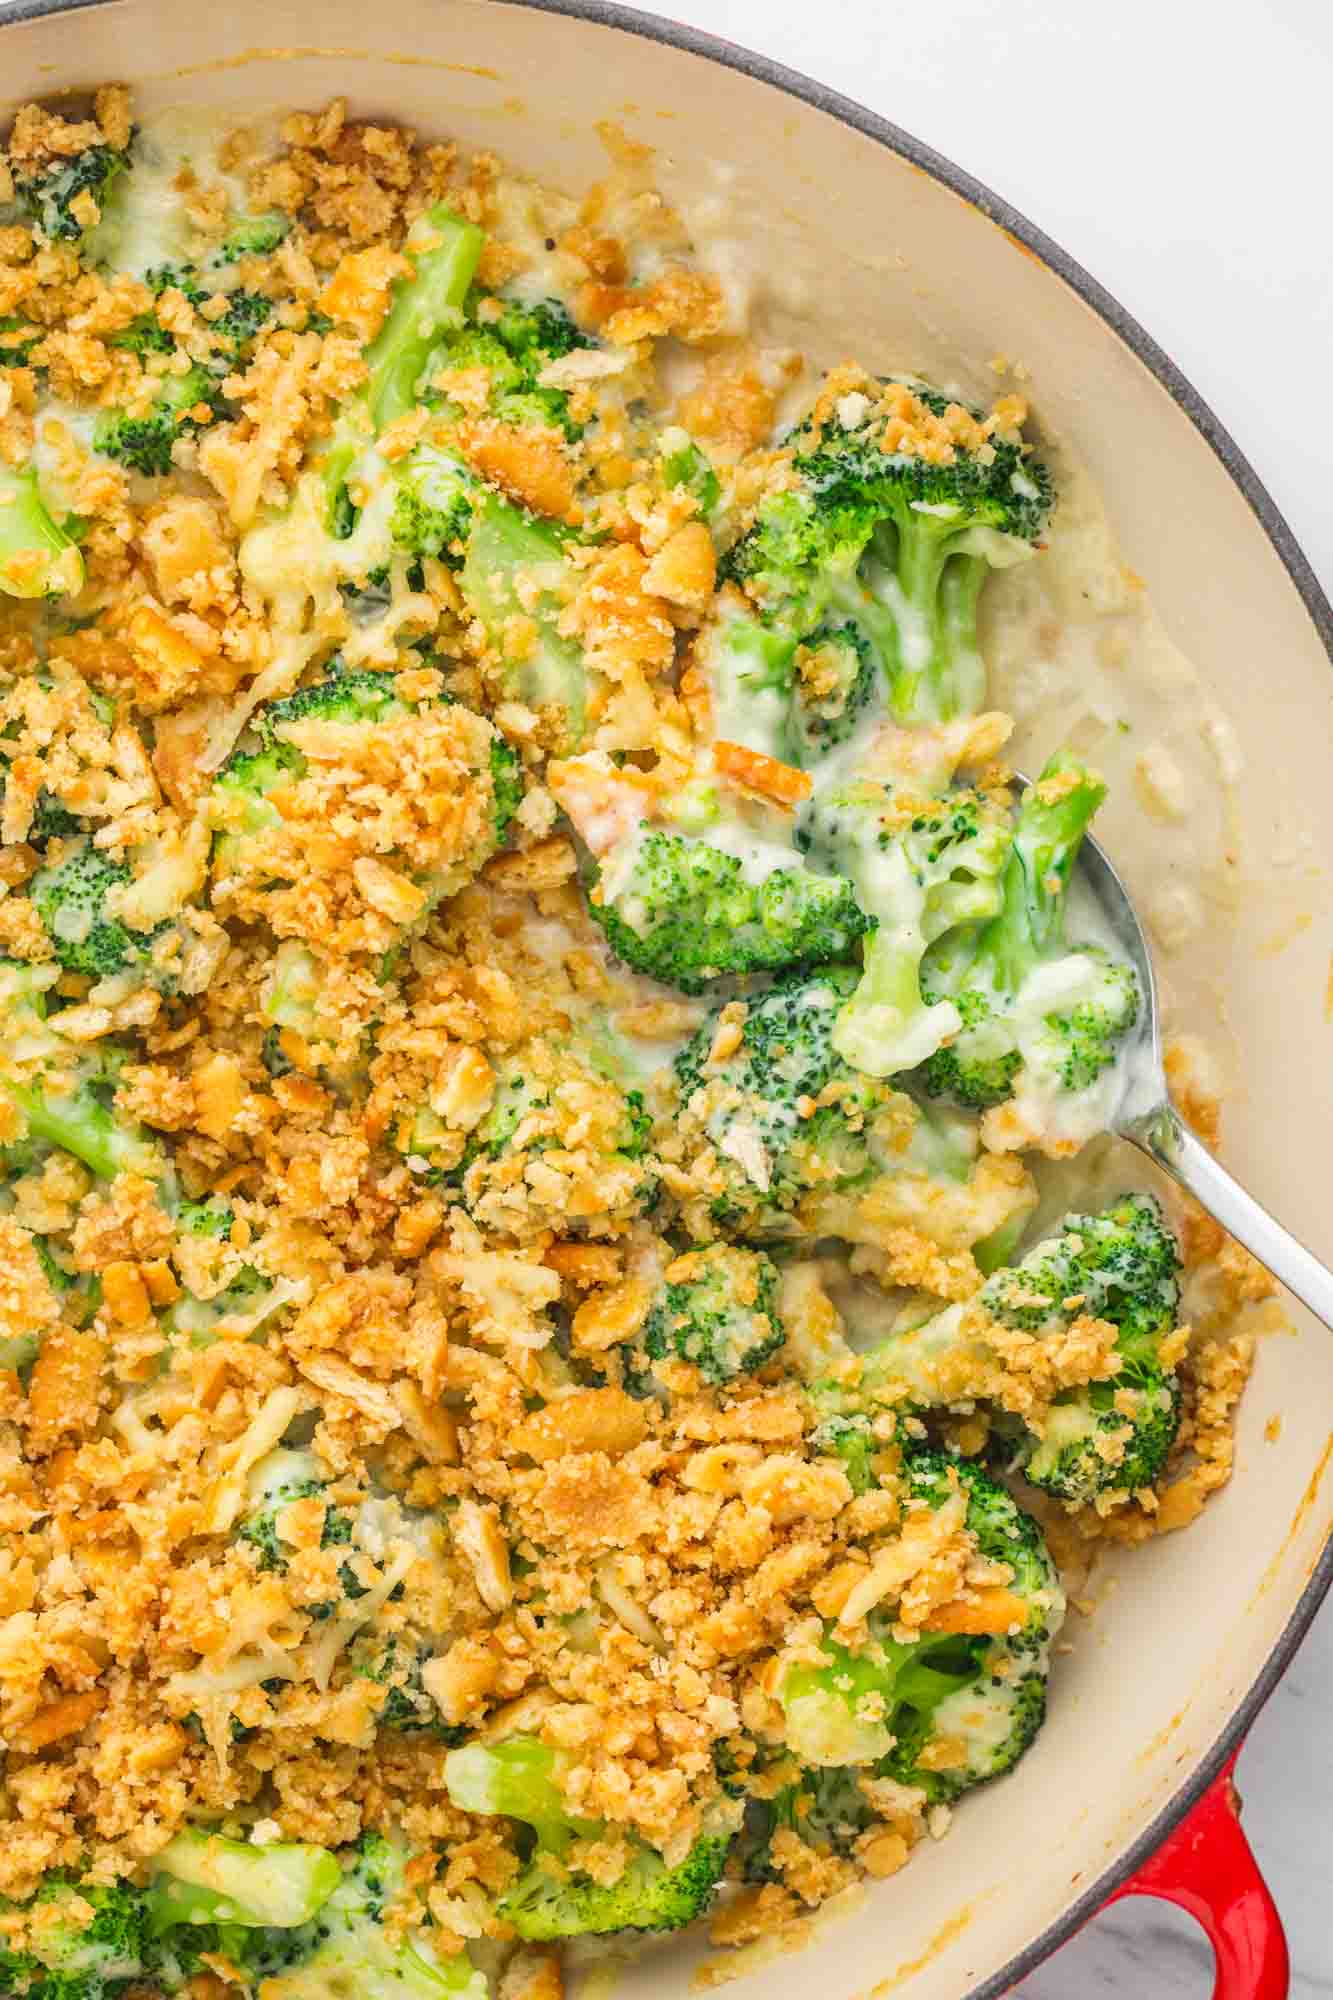 Overhead shot of broccoli casserole in a casserole cast iron dish with a serving spoon